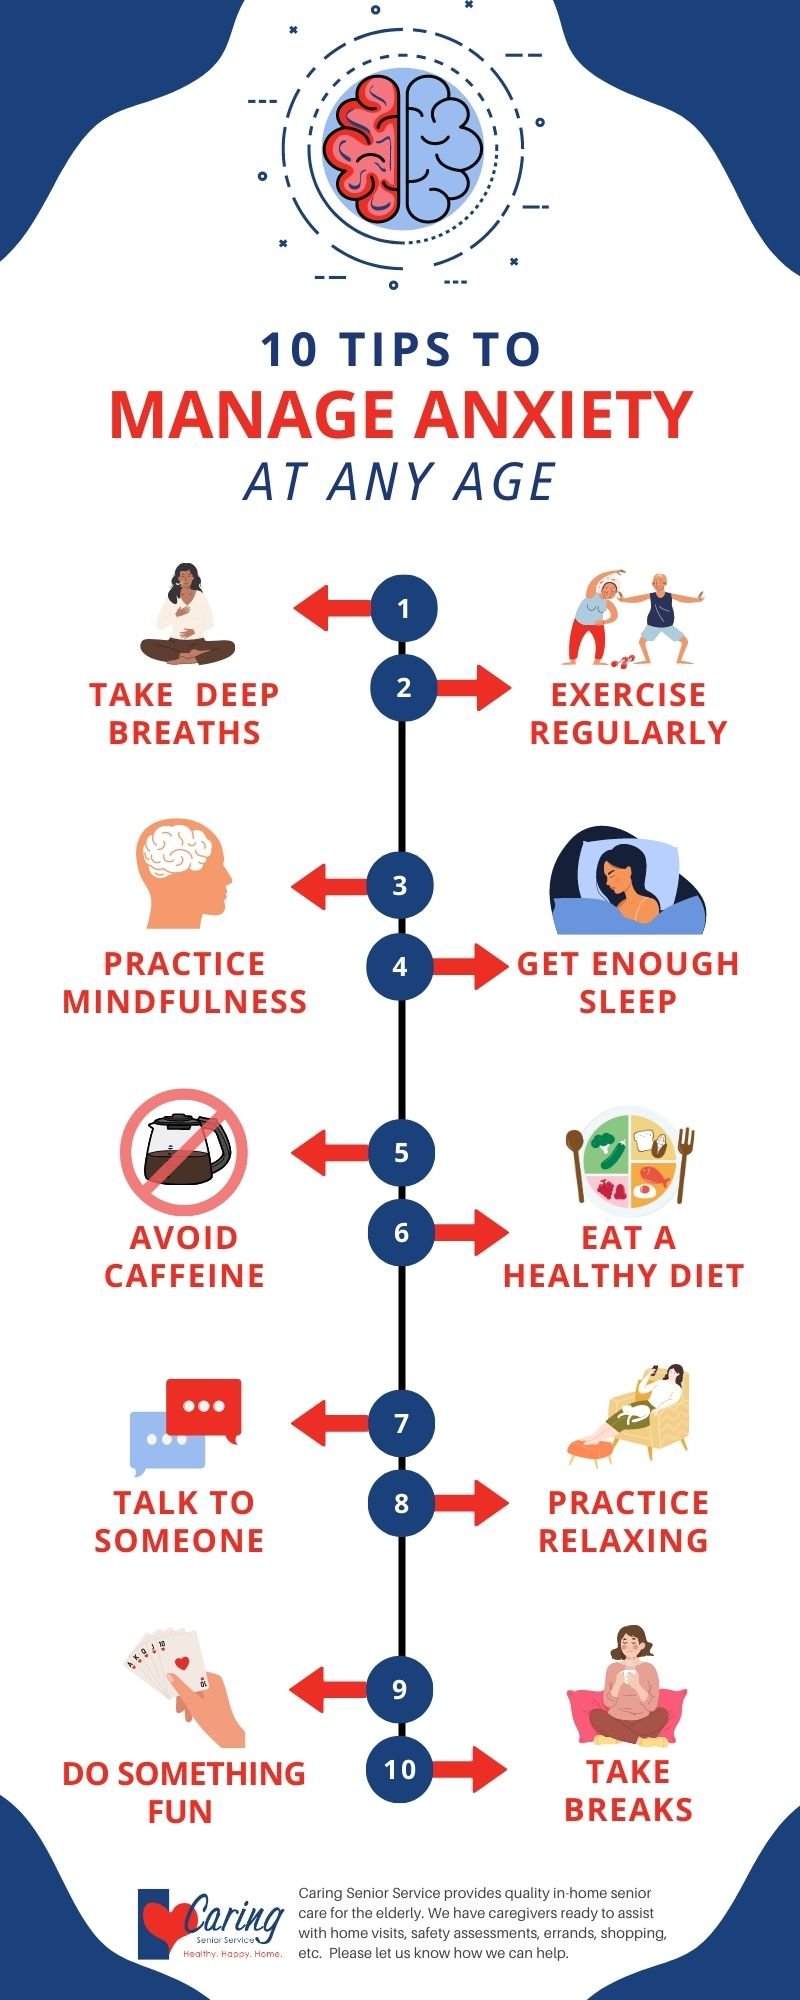 10 Tips to Manage Anxiety Infographic